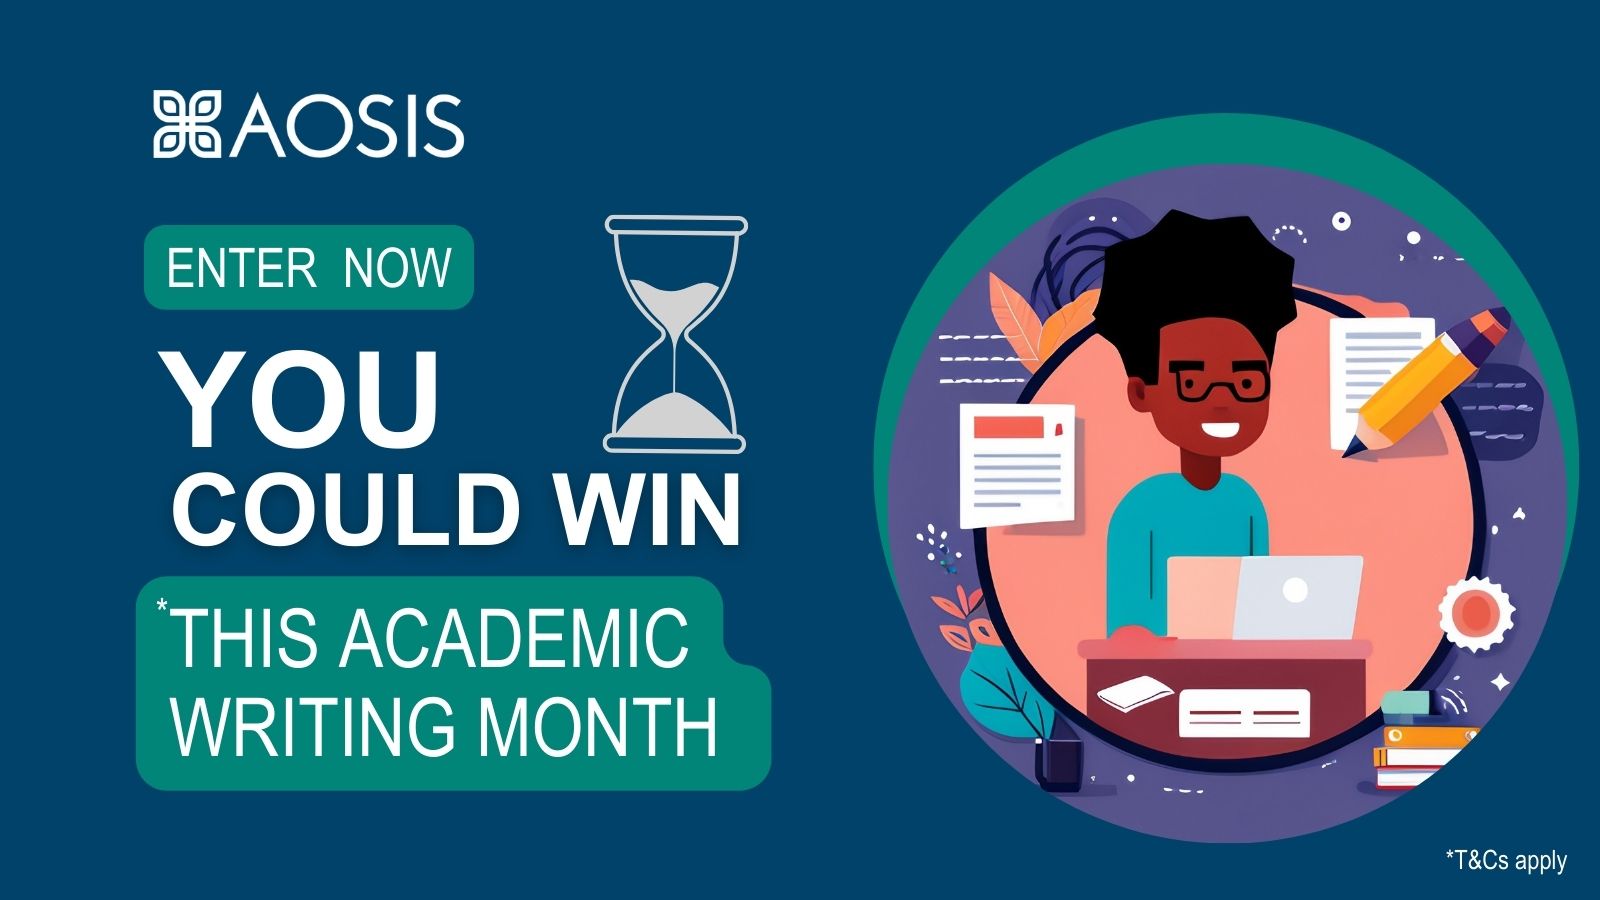 AOSIS Publishing celebrates Academic Writing Month with exciting campaigns